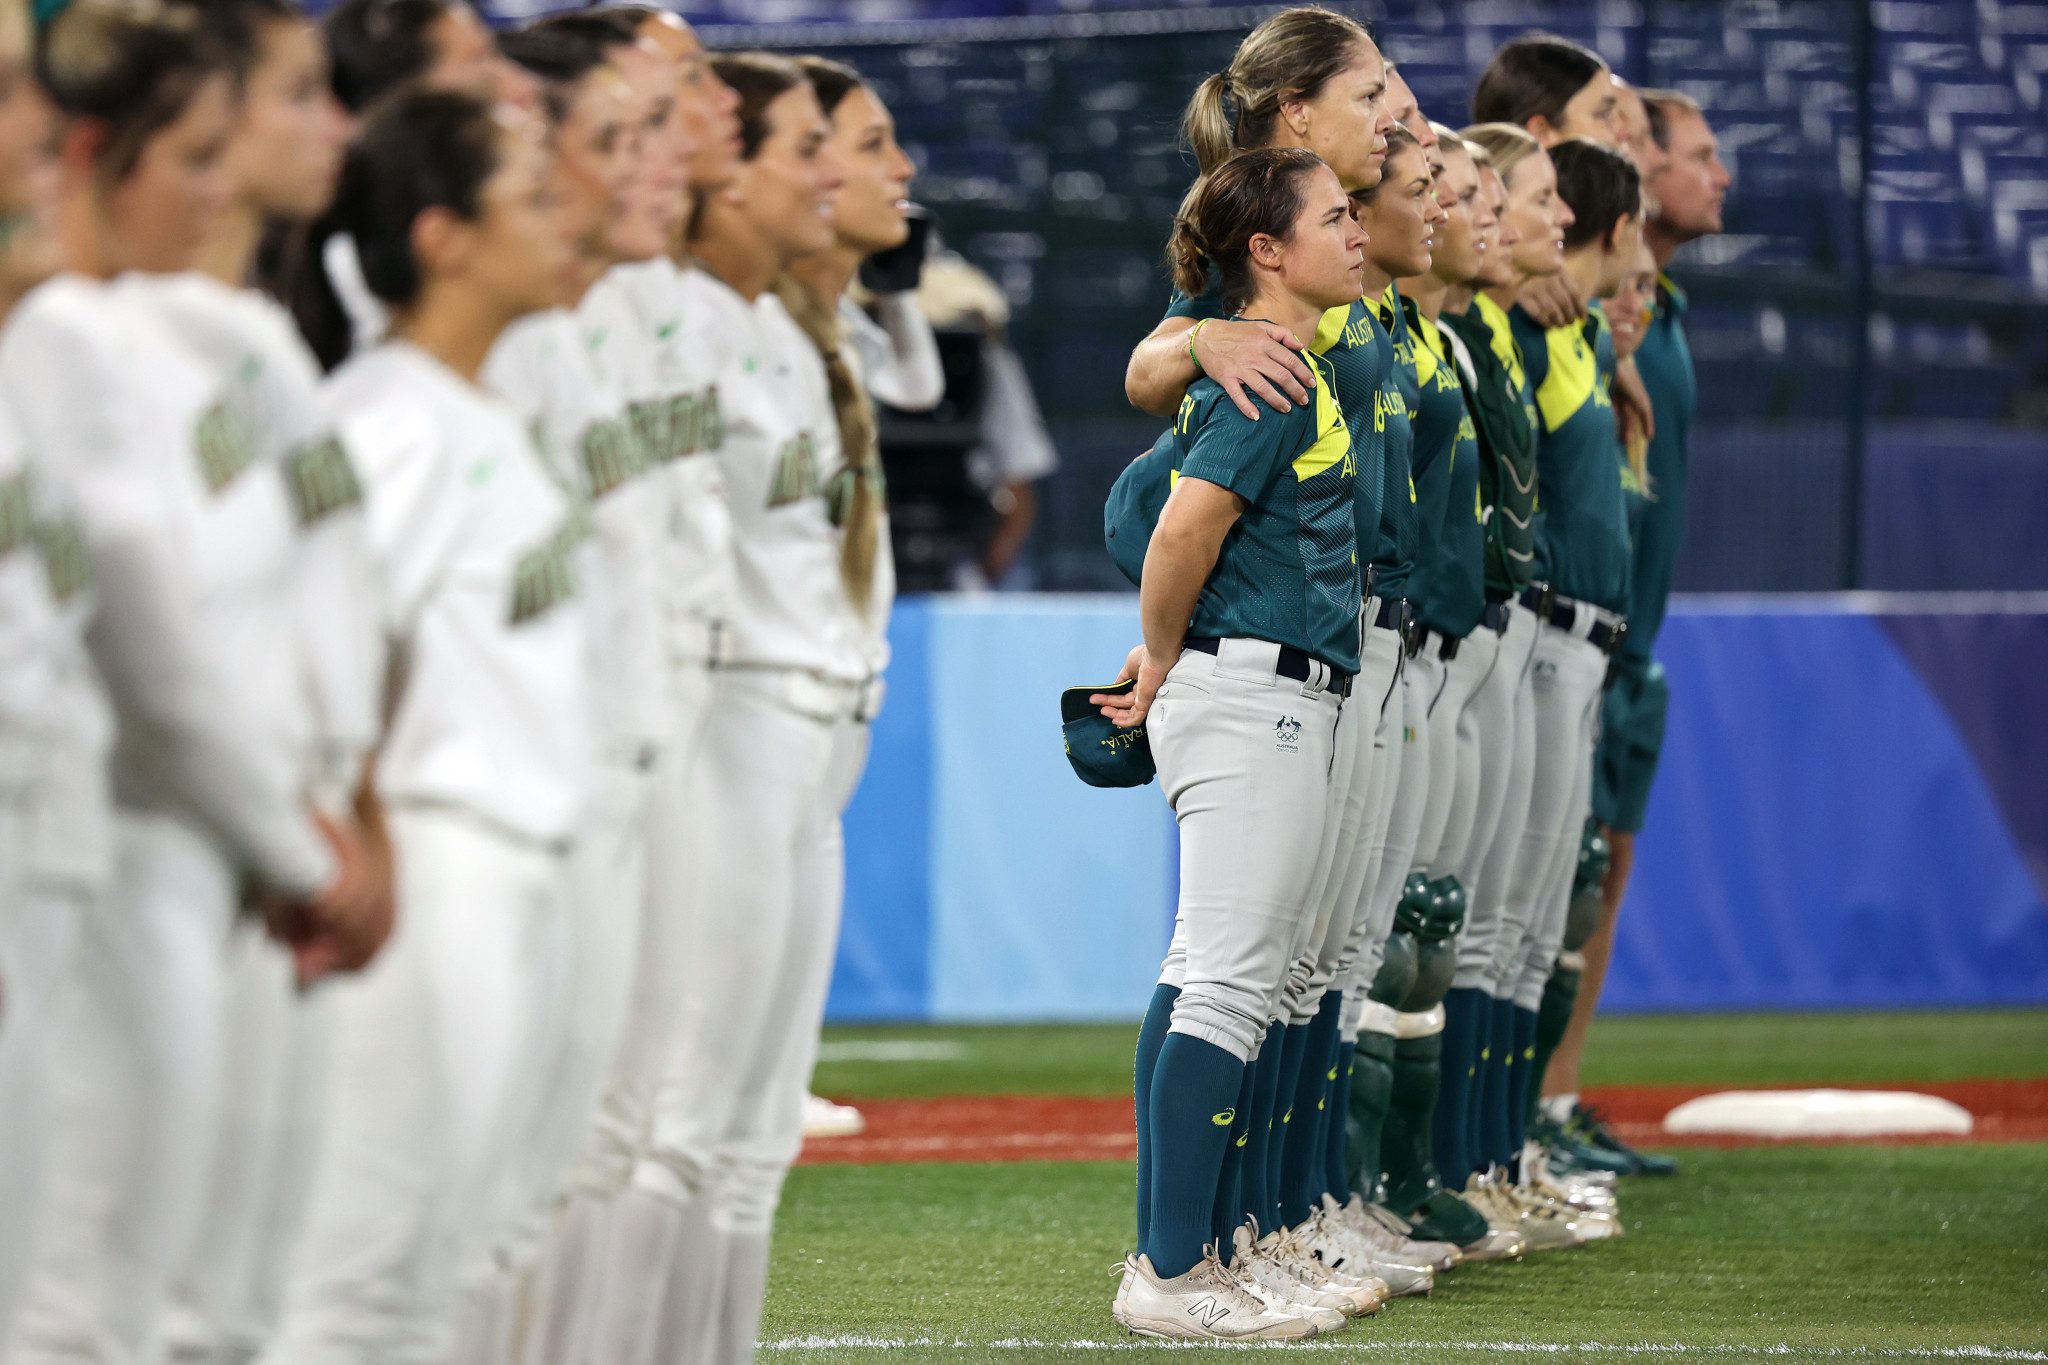 Softball Australia adopts National Integrity Framework with complaints to be handled independently